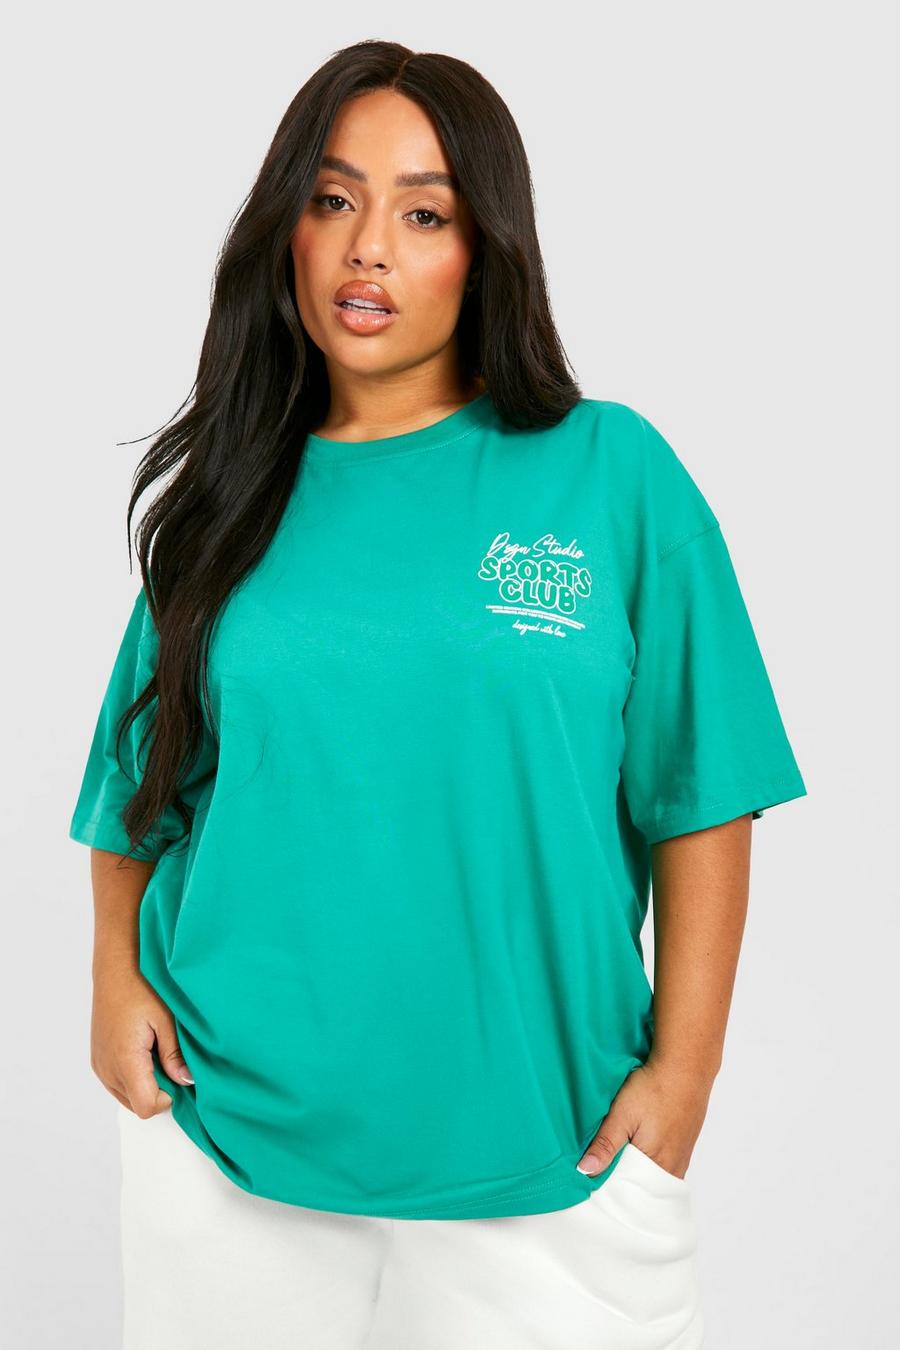 Essential Energy - Oversized Sports T-Shirt for Women